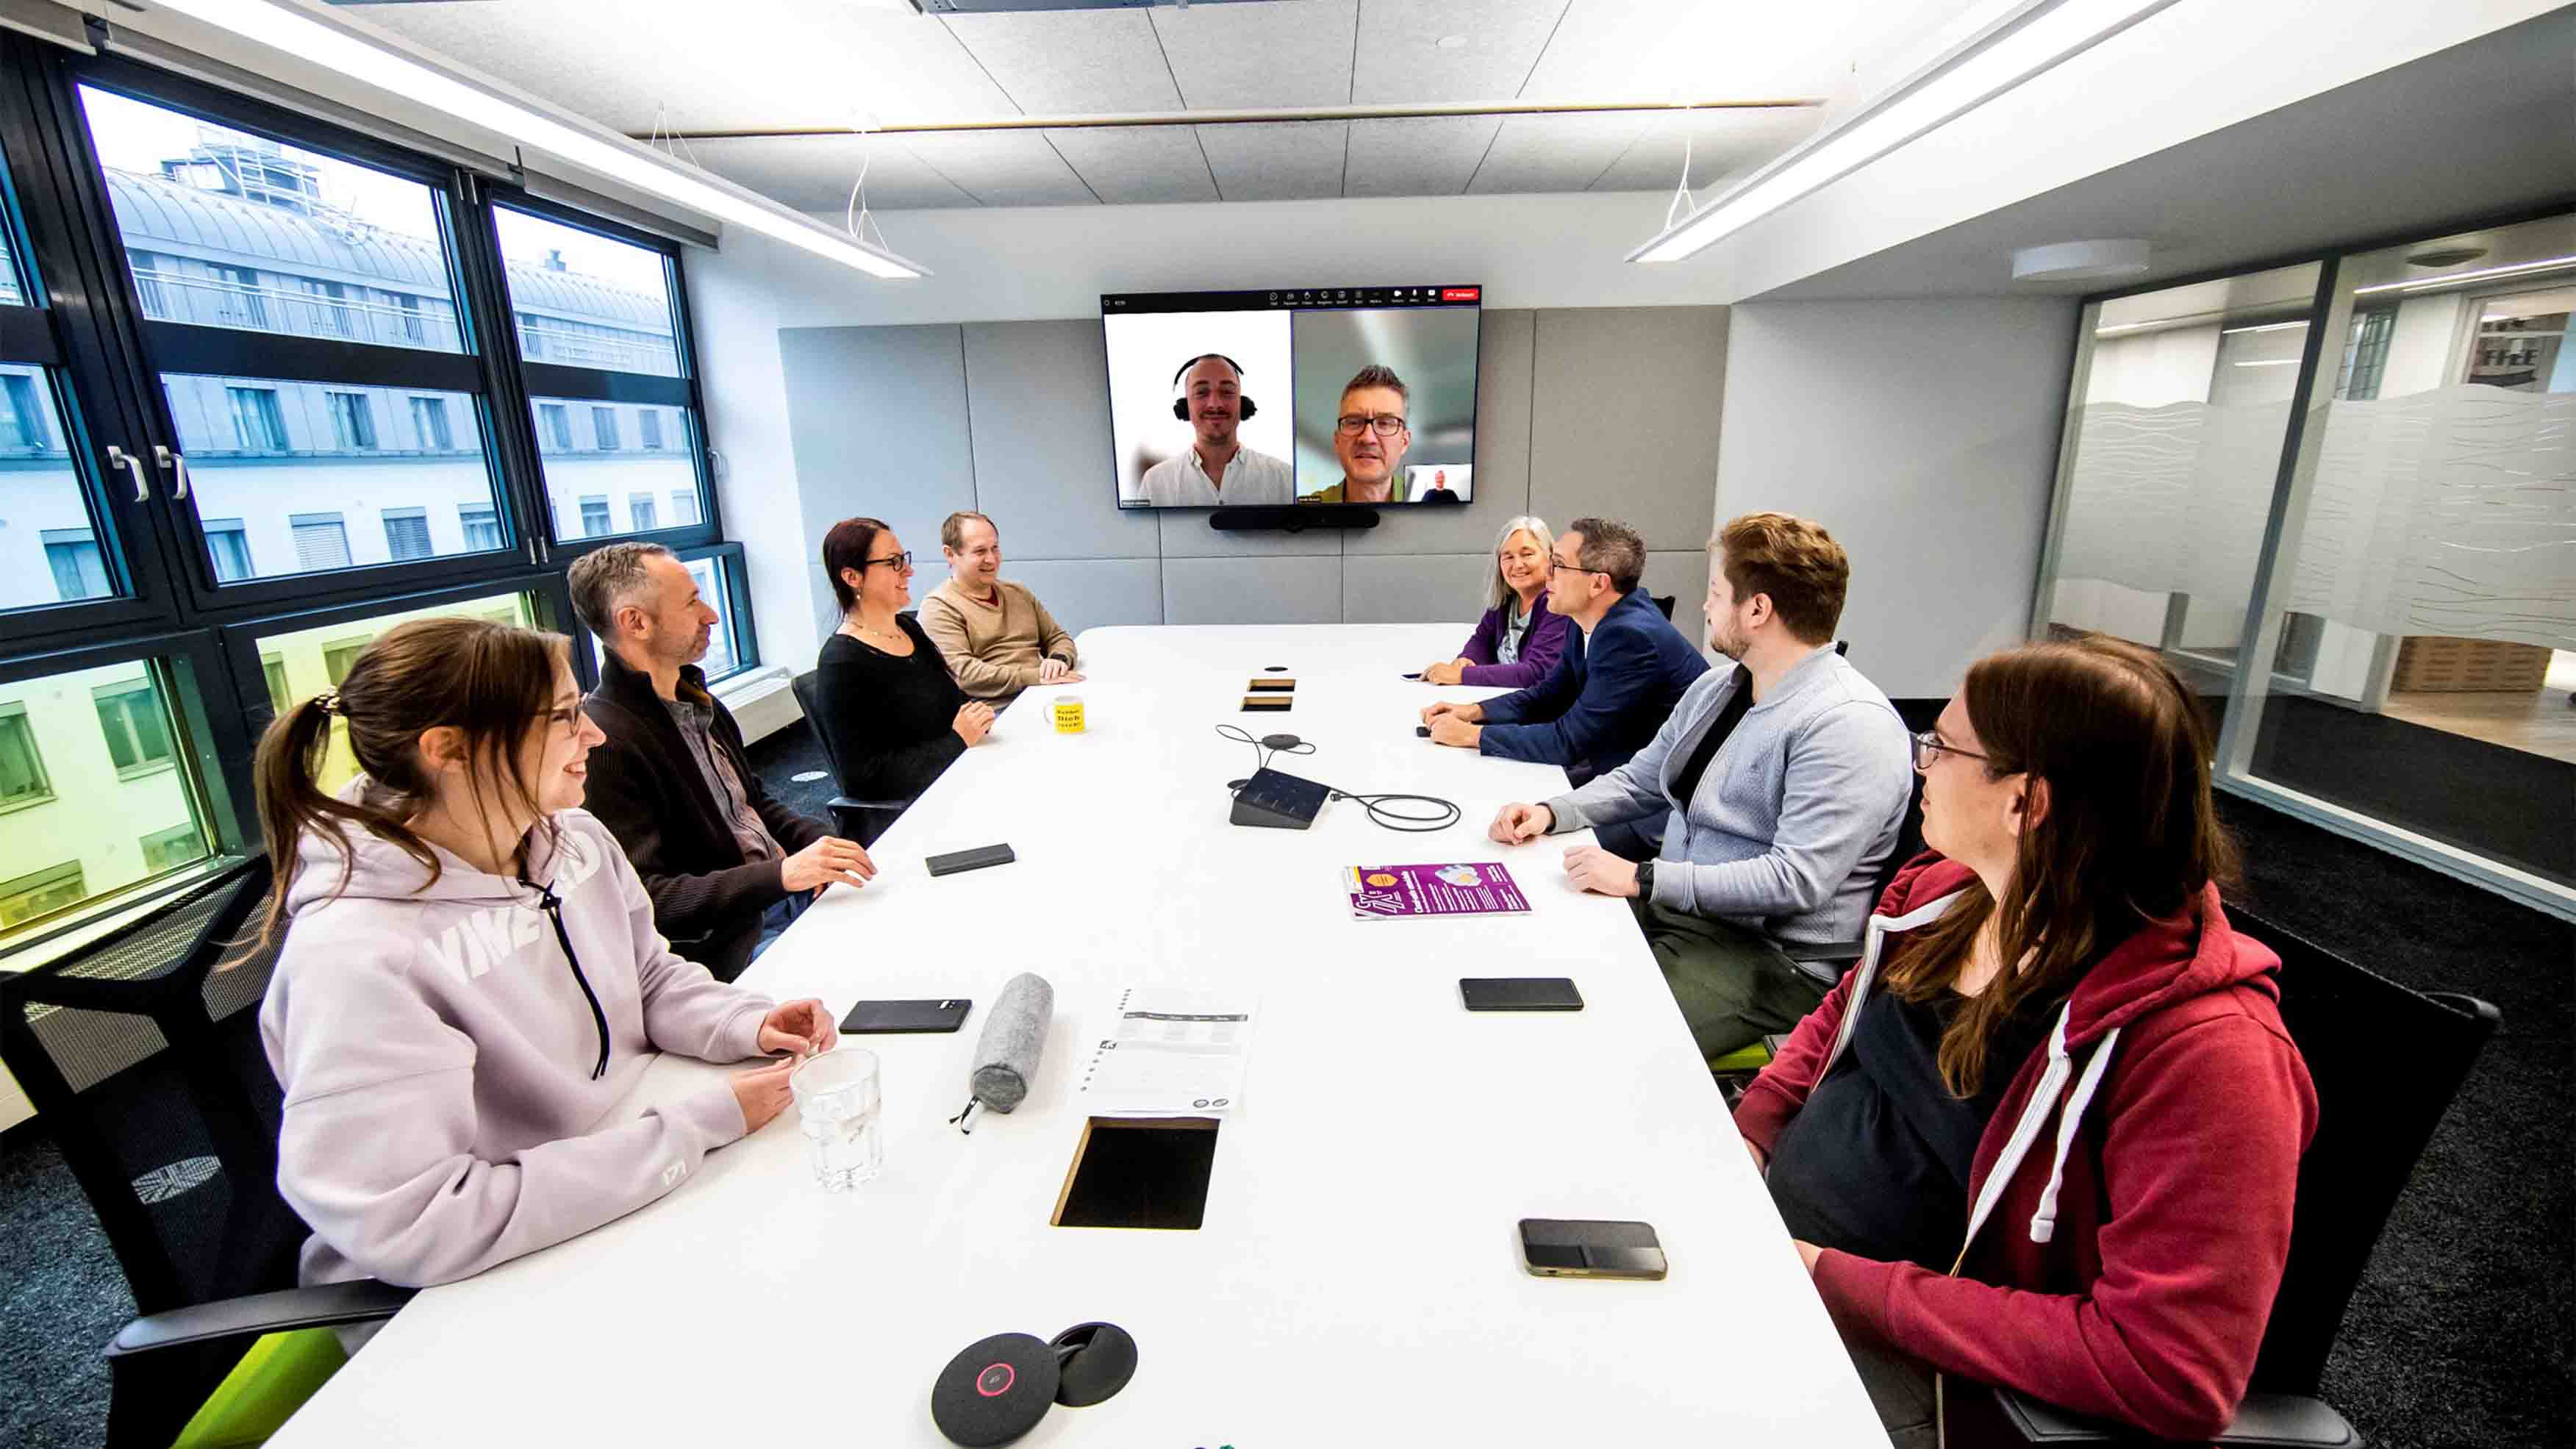 Four women and four men sit at a large meeting table in a modern room. Two other men from home offices take part in the meeting via screen.